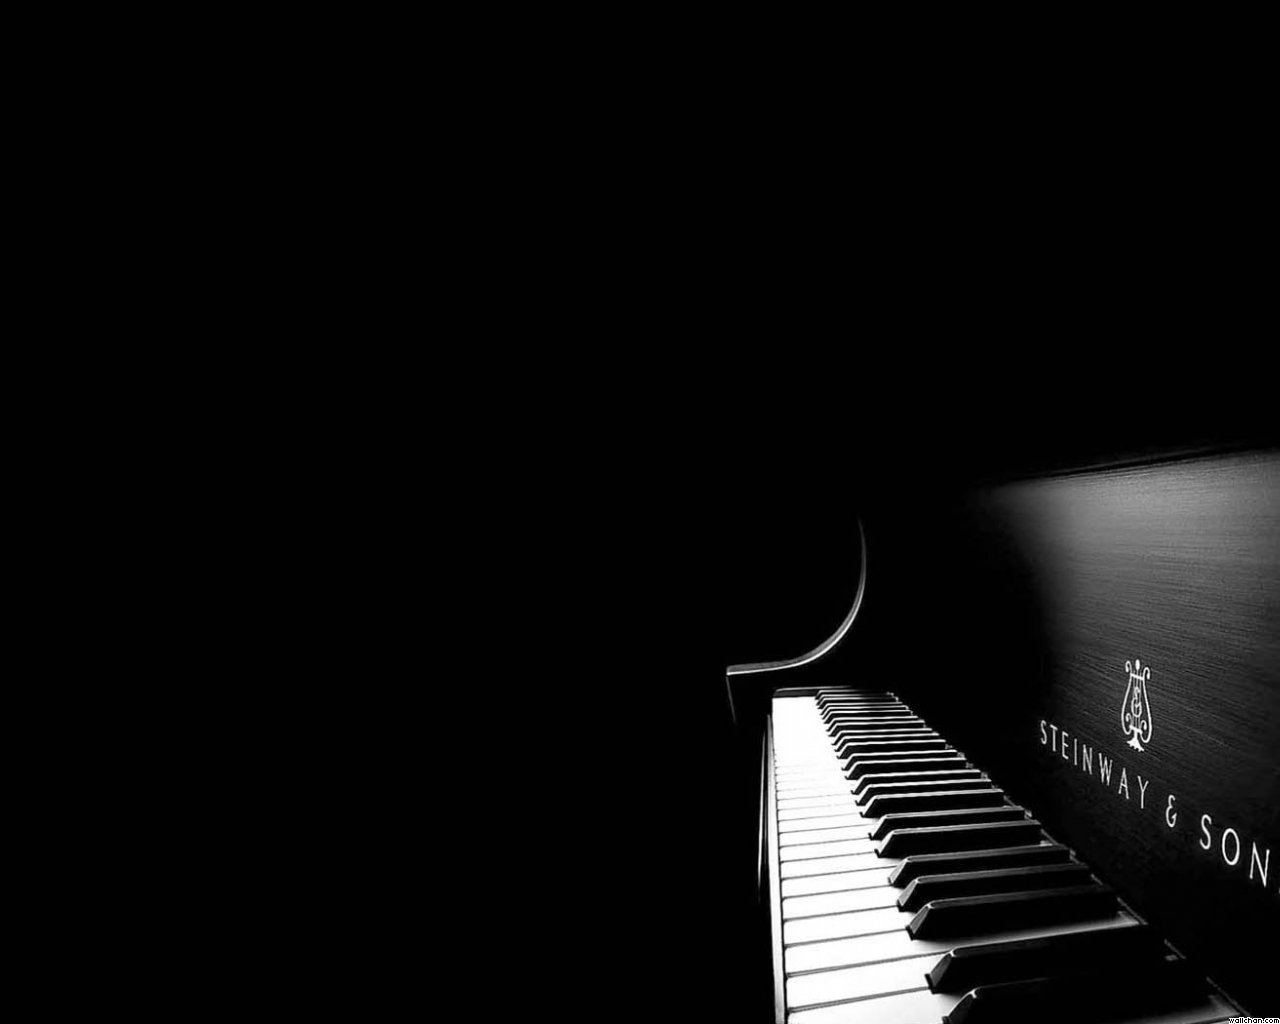 Piano Music Notes Wallpaper 8006 Hd Wallpapers in Music   Imagescicom